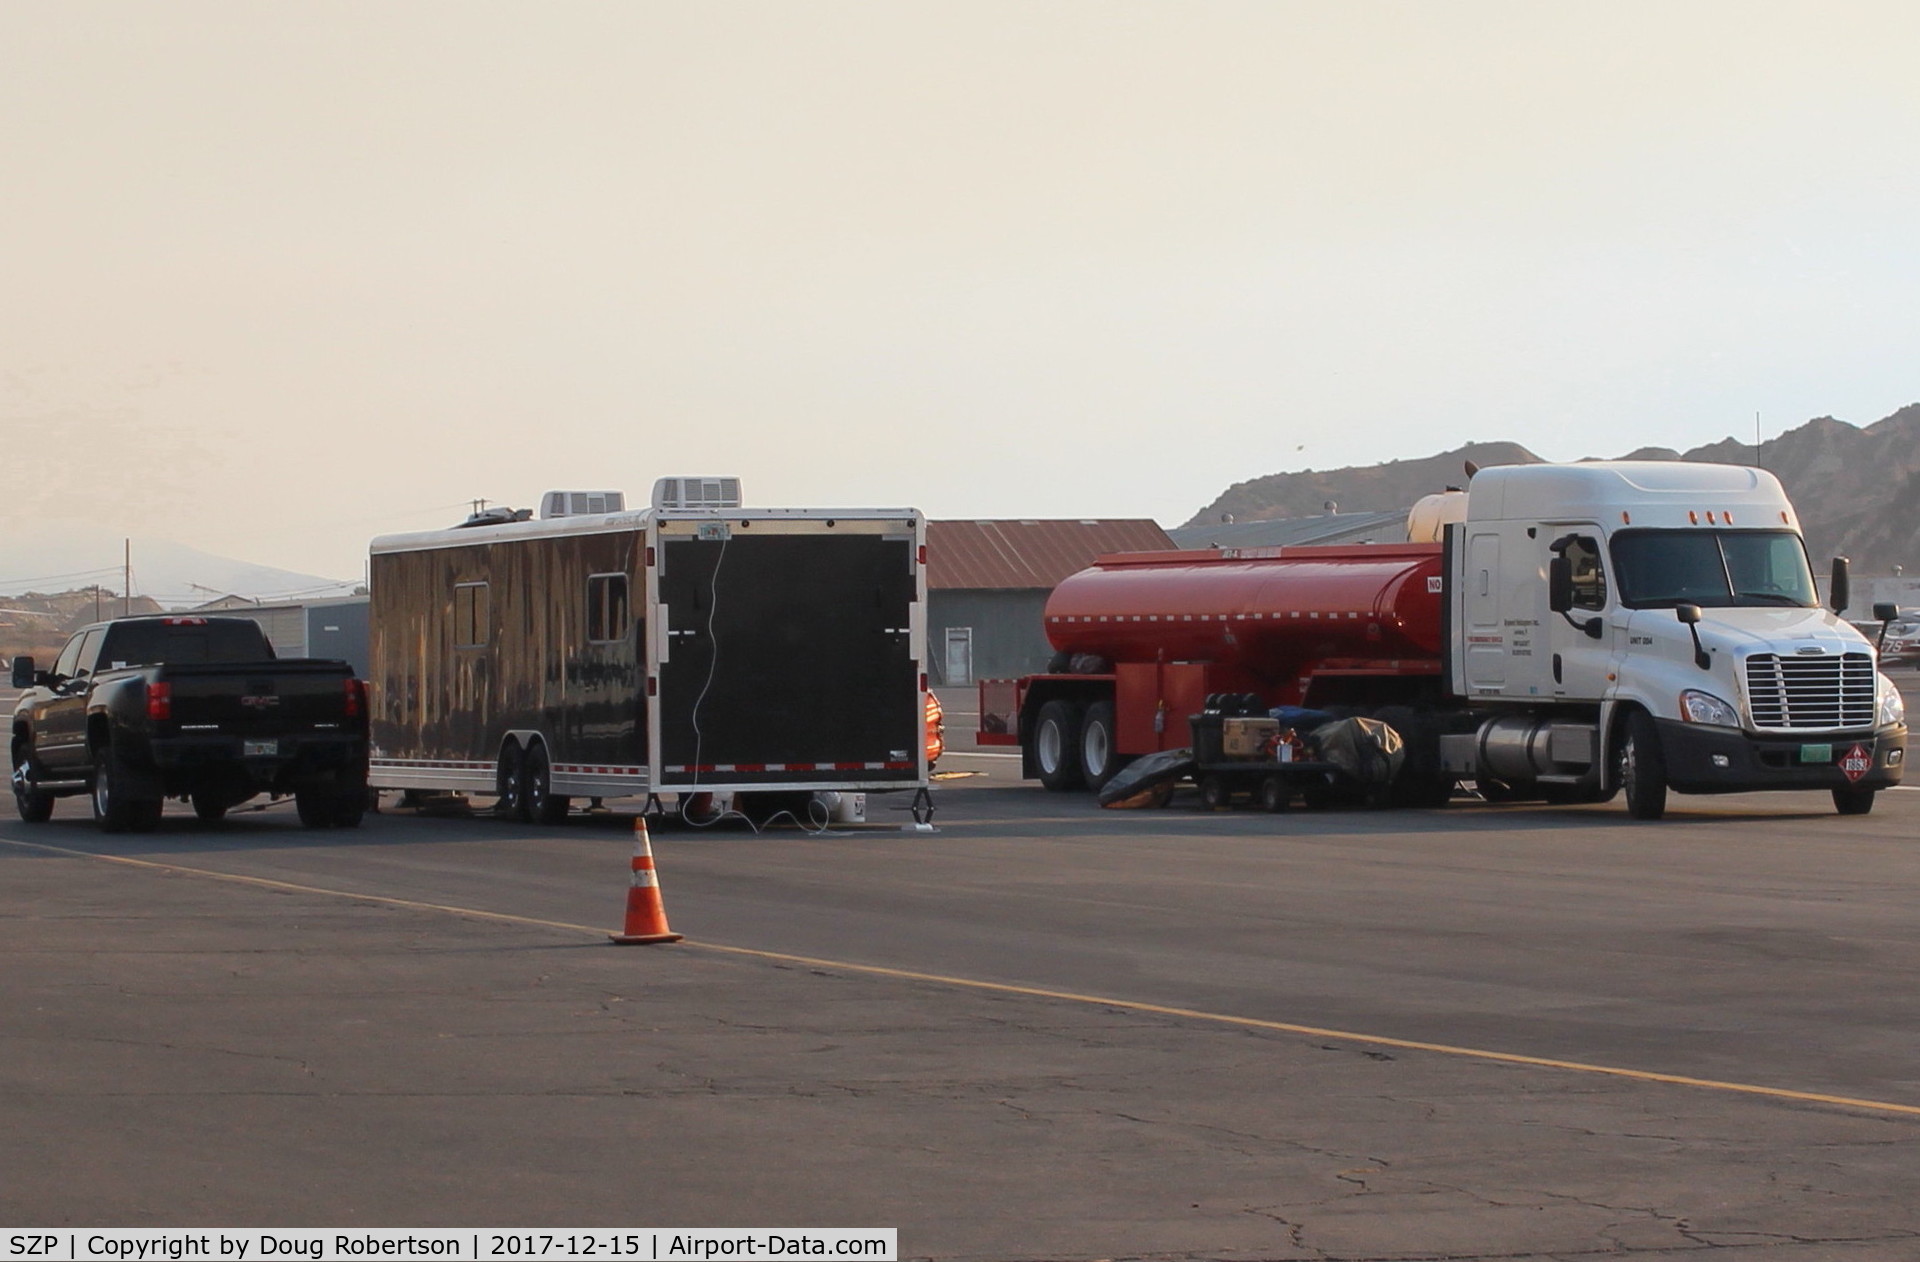 Santa Paula Airport (SZP) - More support equipment for the Thomas Fire-aircraft fuels are both 100LL and Jet-A from mobile tankers. 